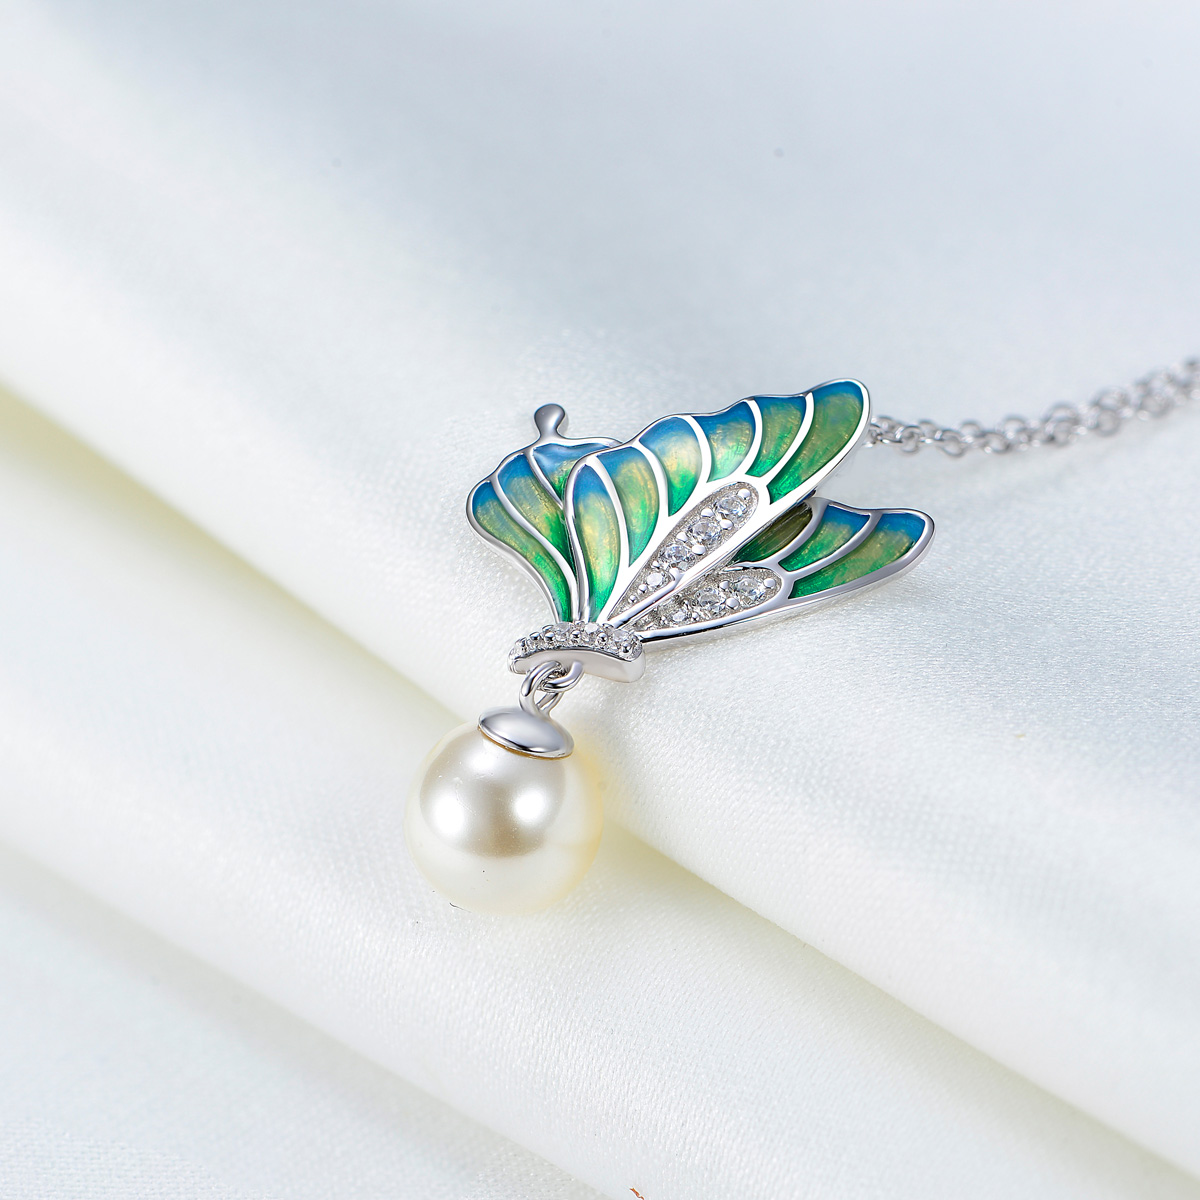 pearl butterfly pendant necklace